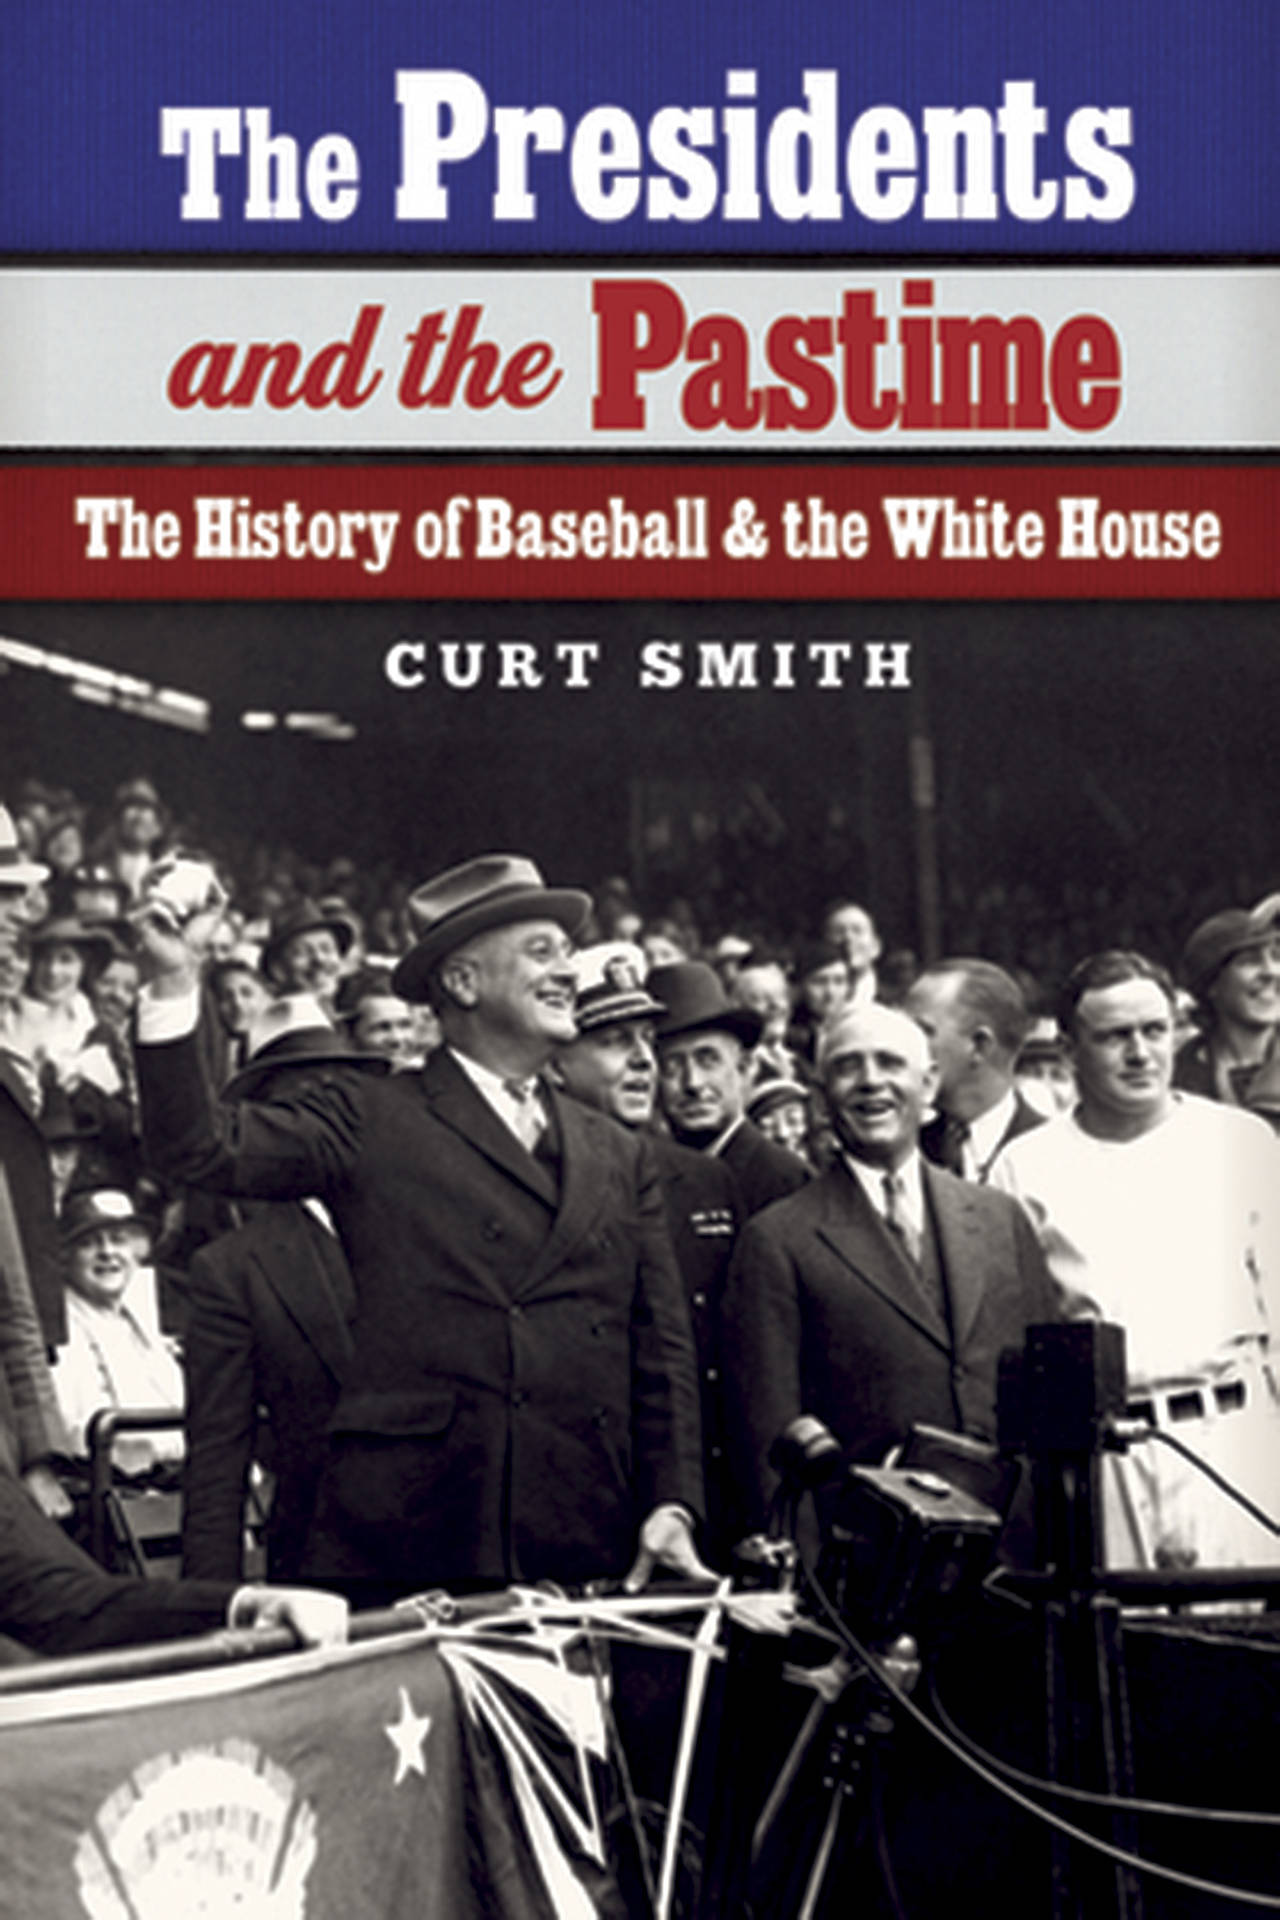 “The Presidents and the Pastime” by Curt Smith, University of Nebraska, 504 pages, $29.95. (University of Nebraska)